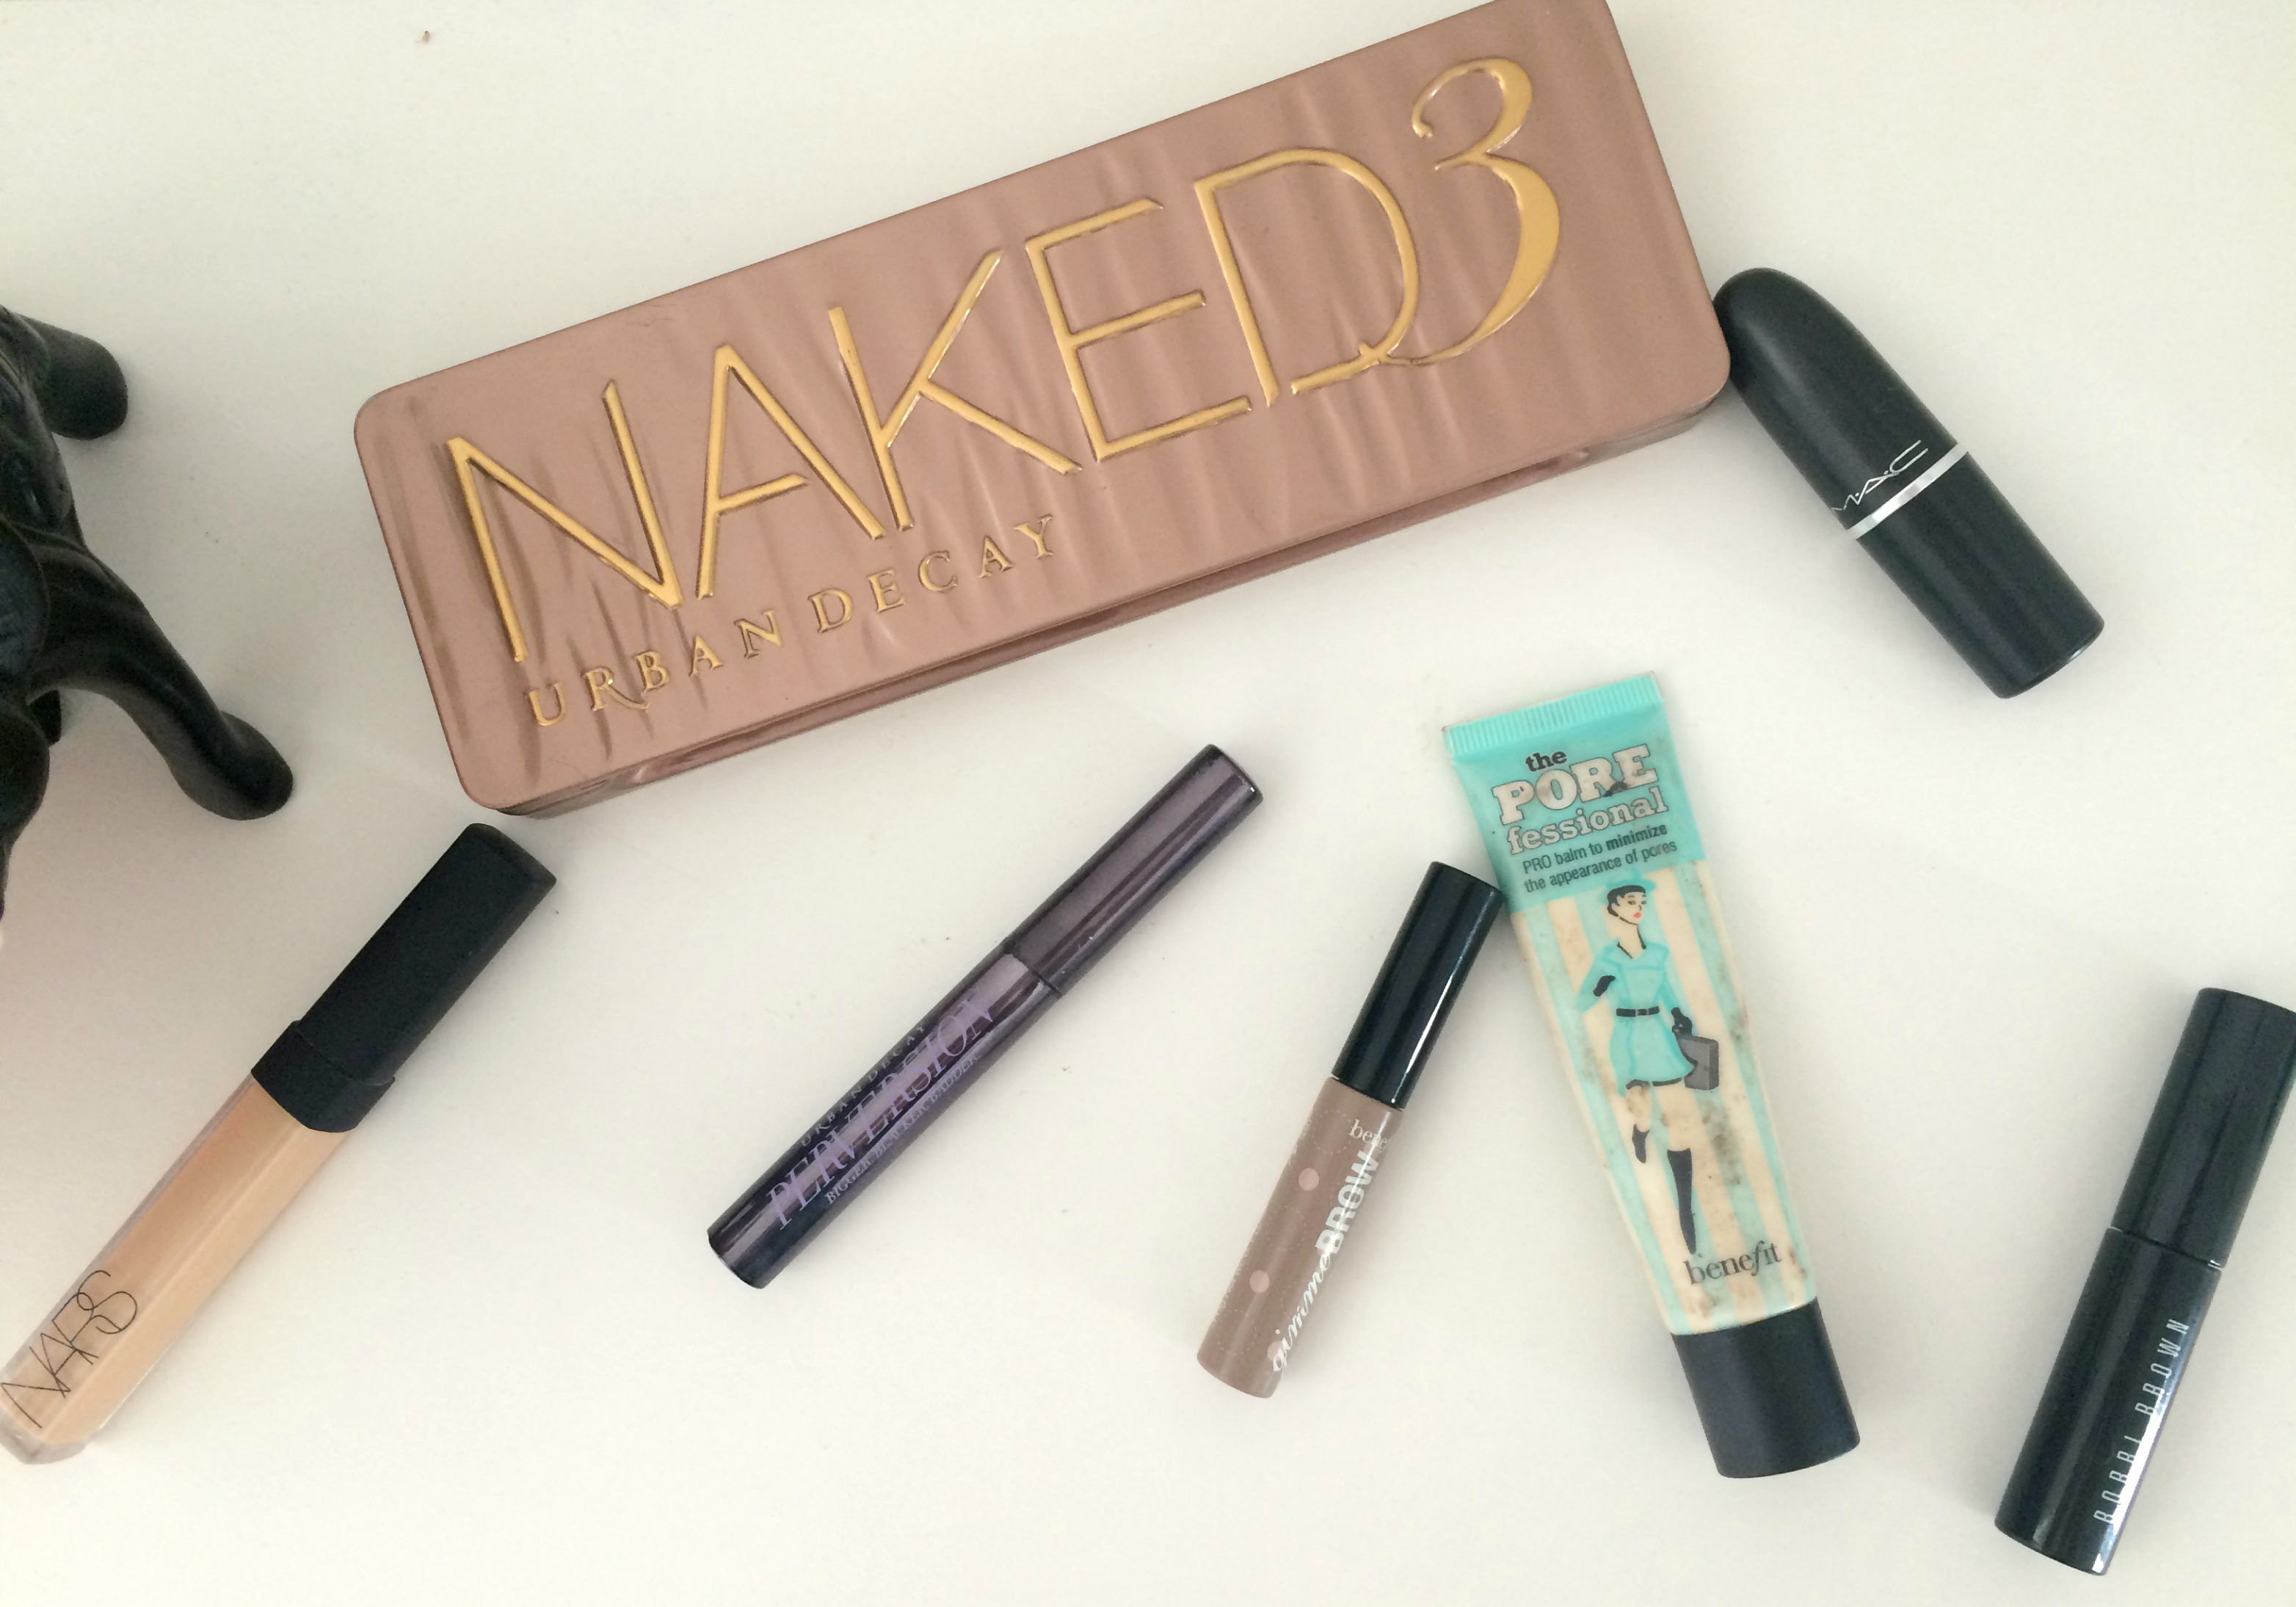 High End Make-Up That's Worth The Price